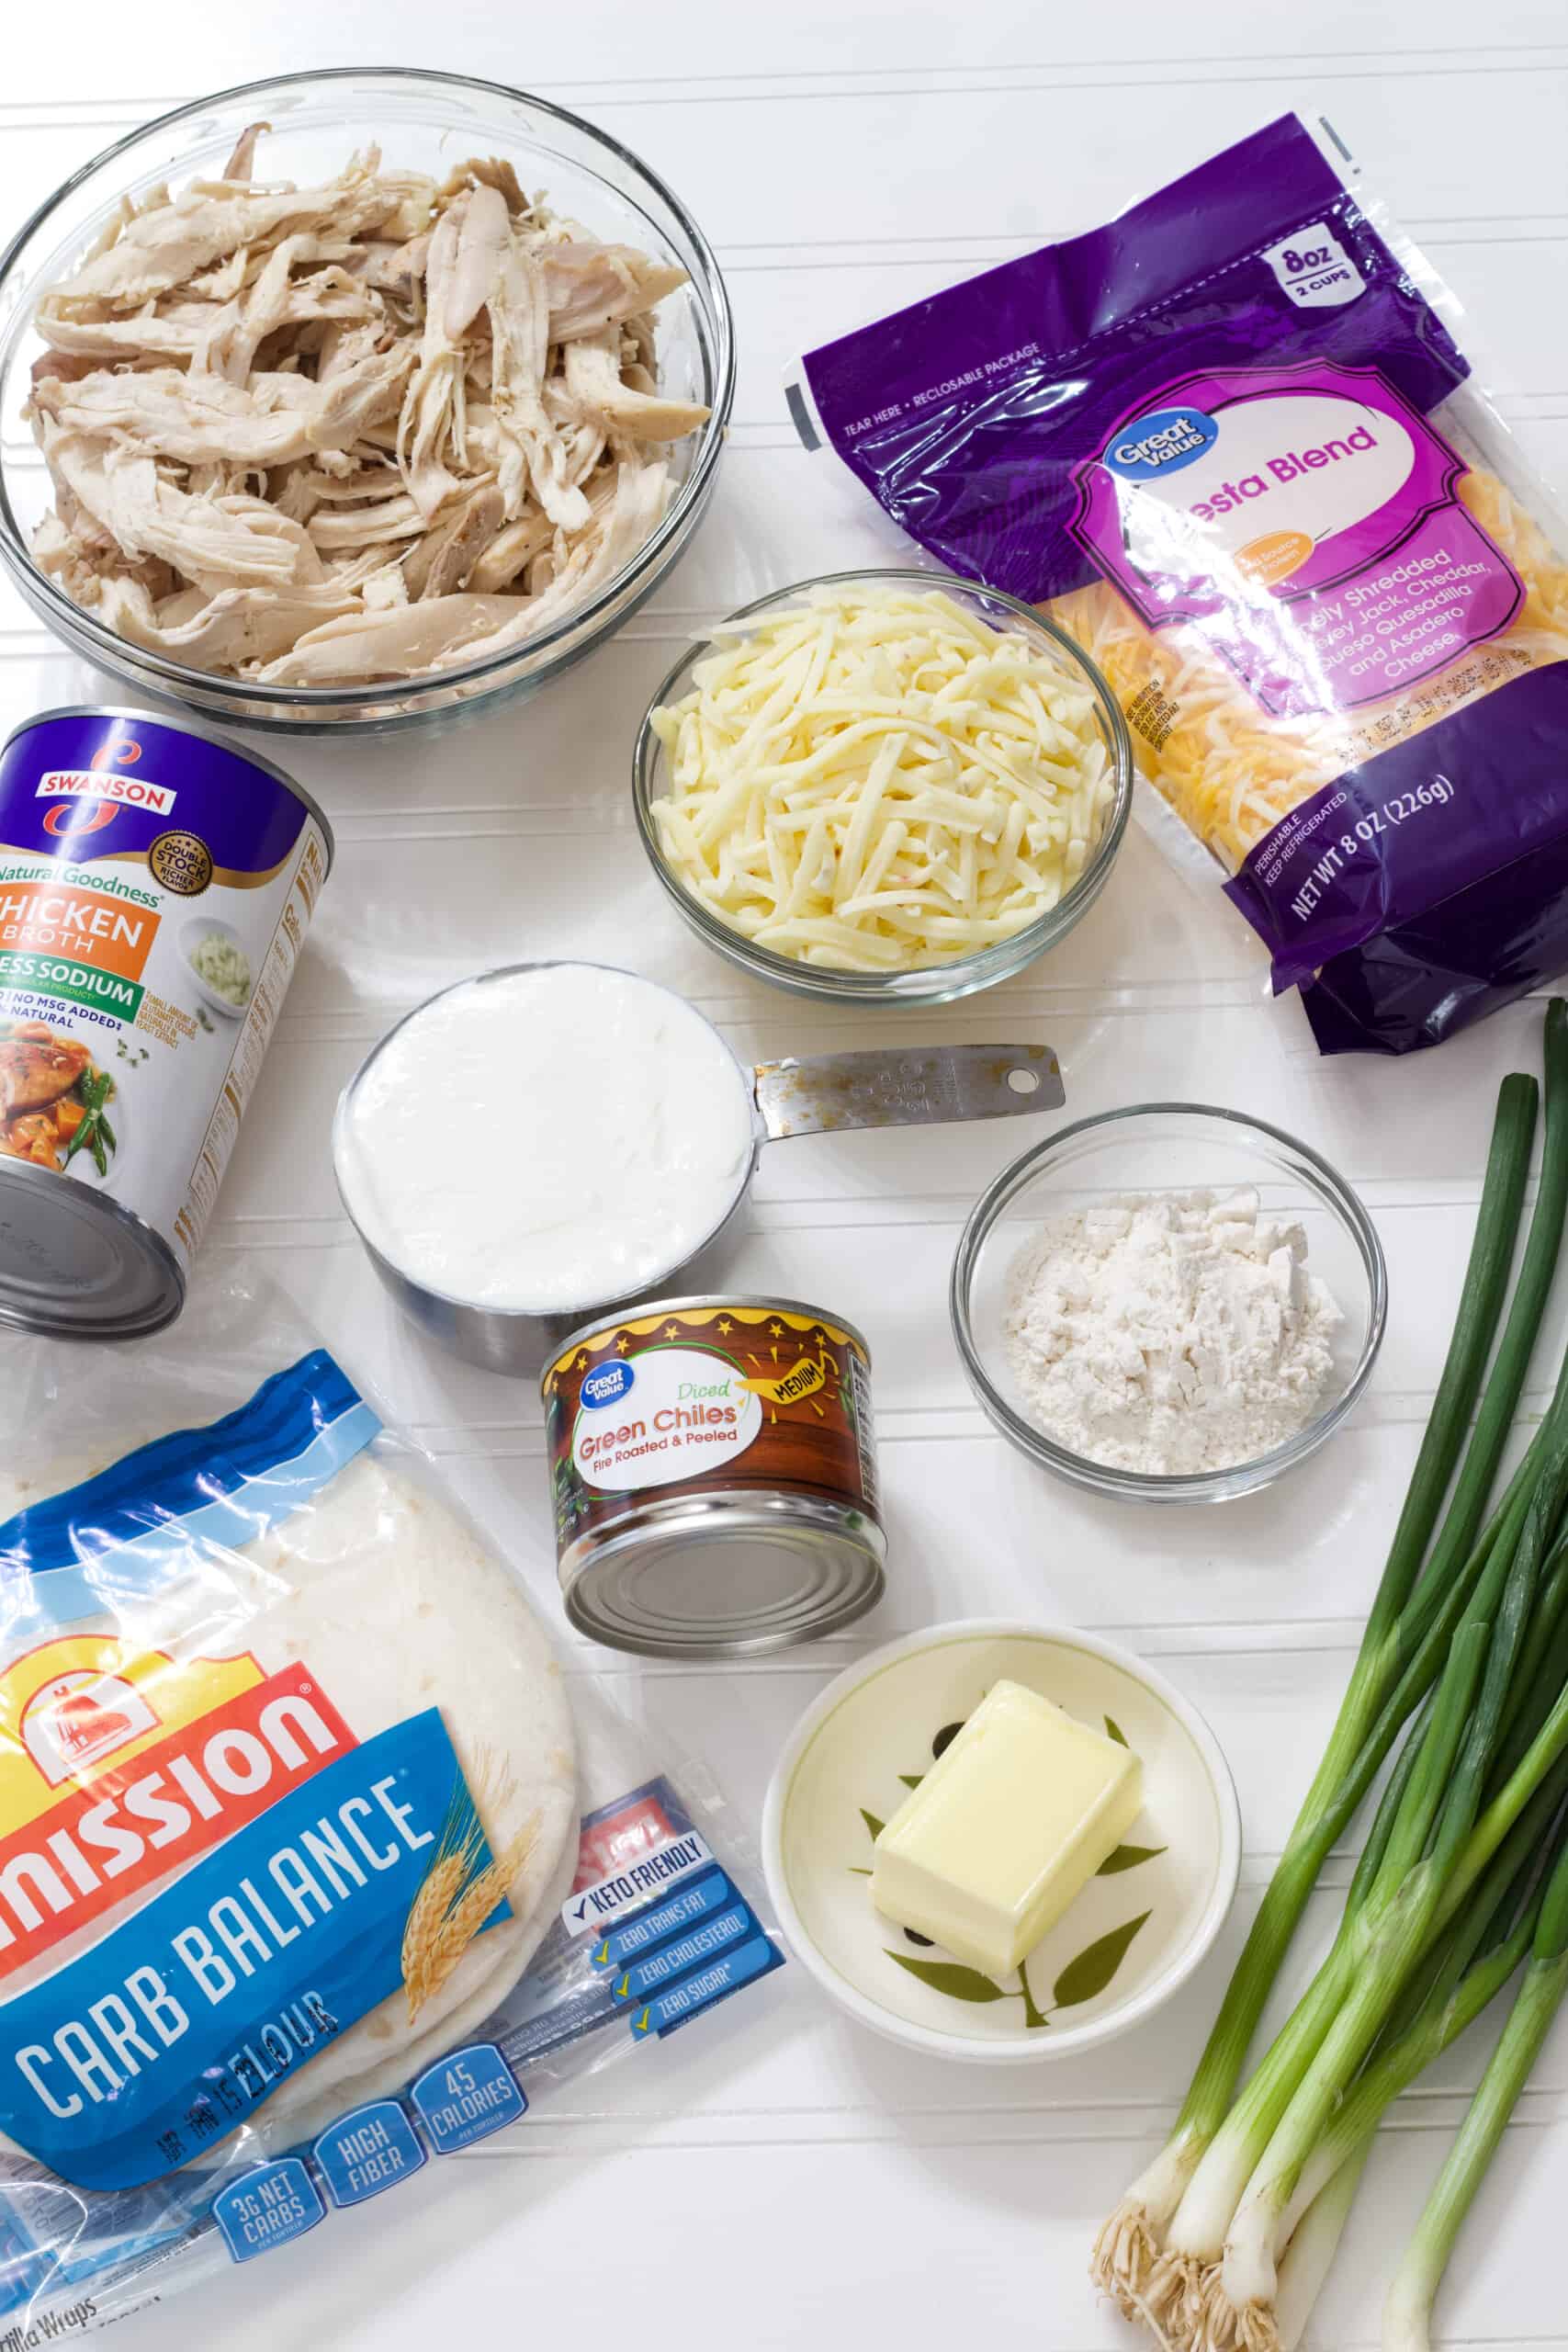 All of the ingredients needed to make easy low carb sour cream chicken enchiladas recipe.